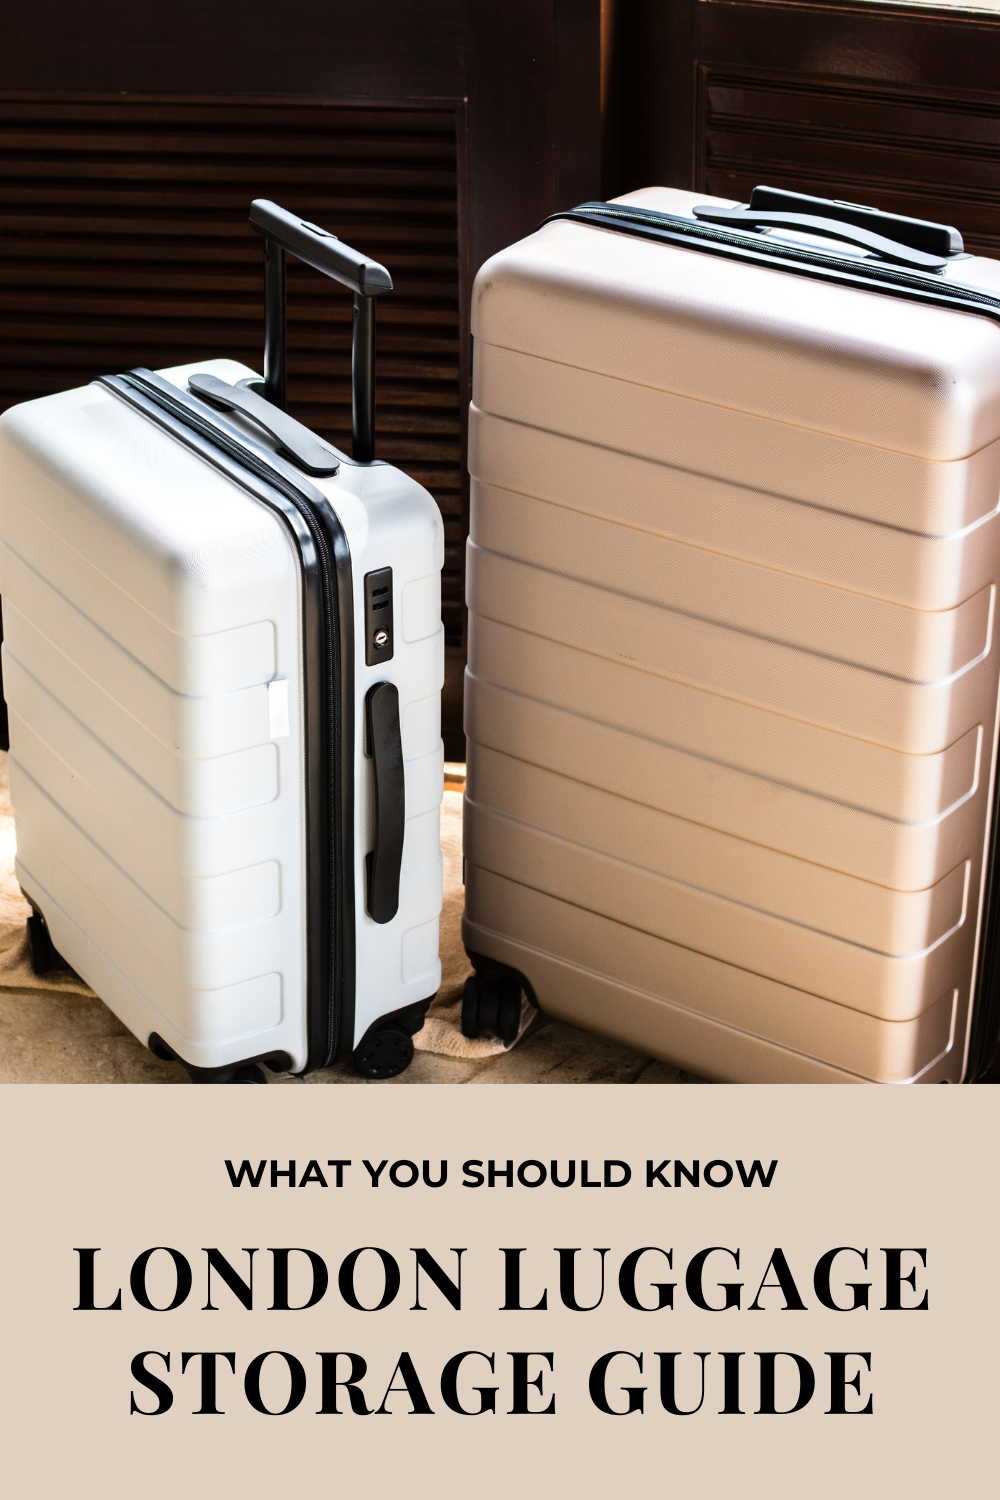 London Luggage Storage Guide What You Should Know